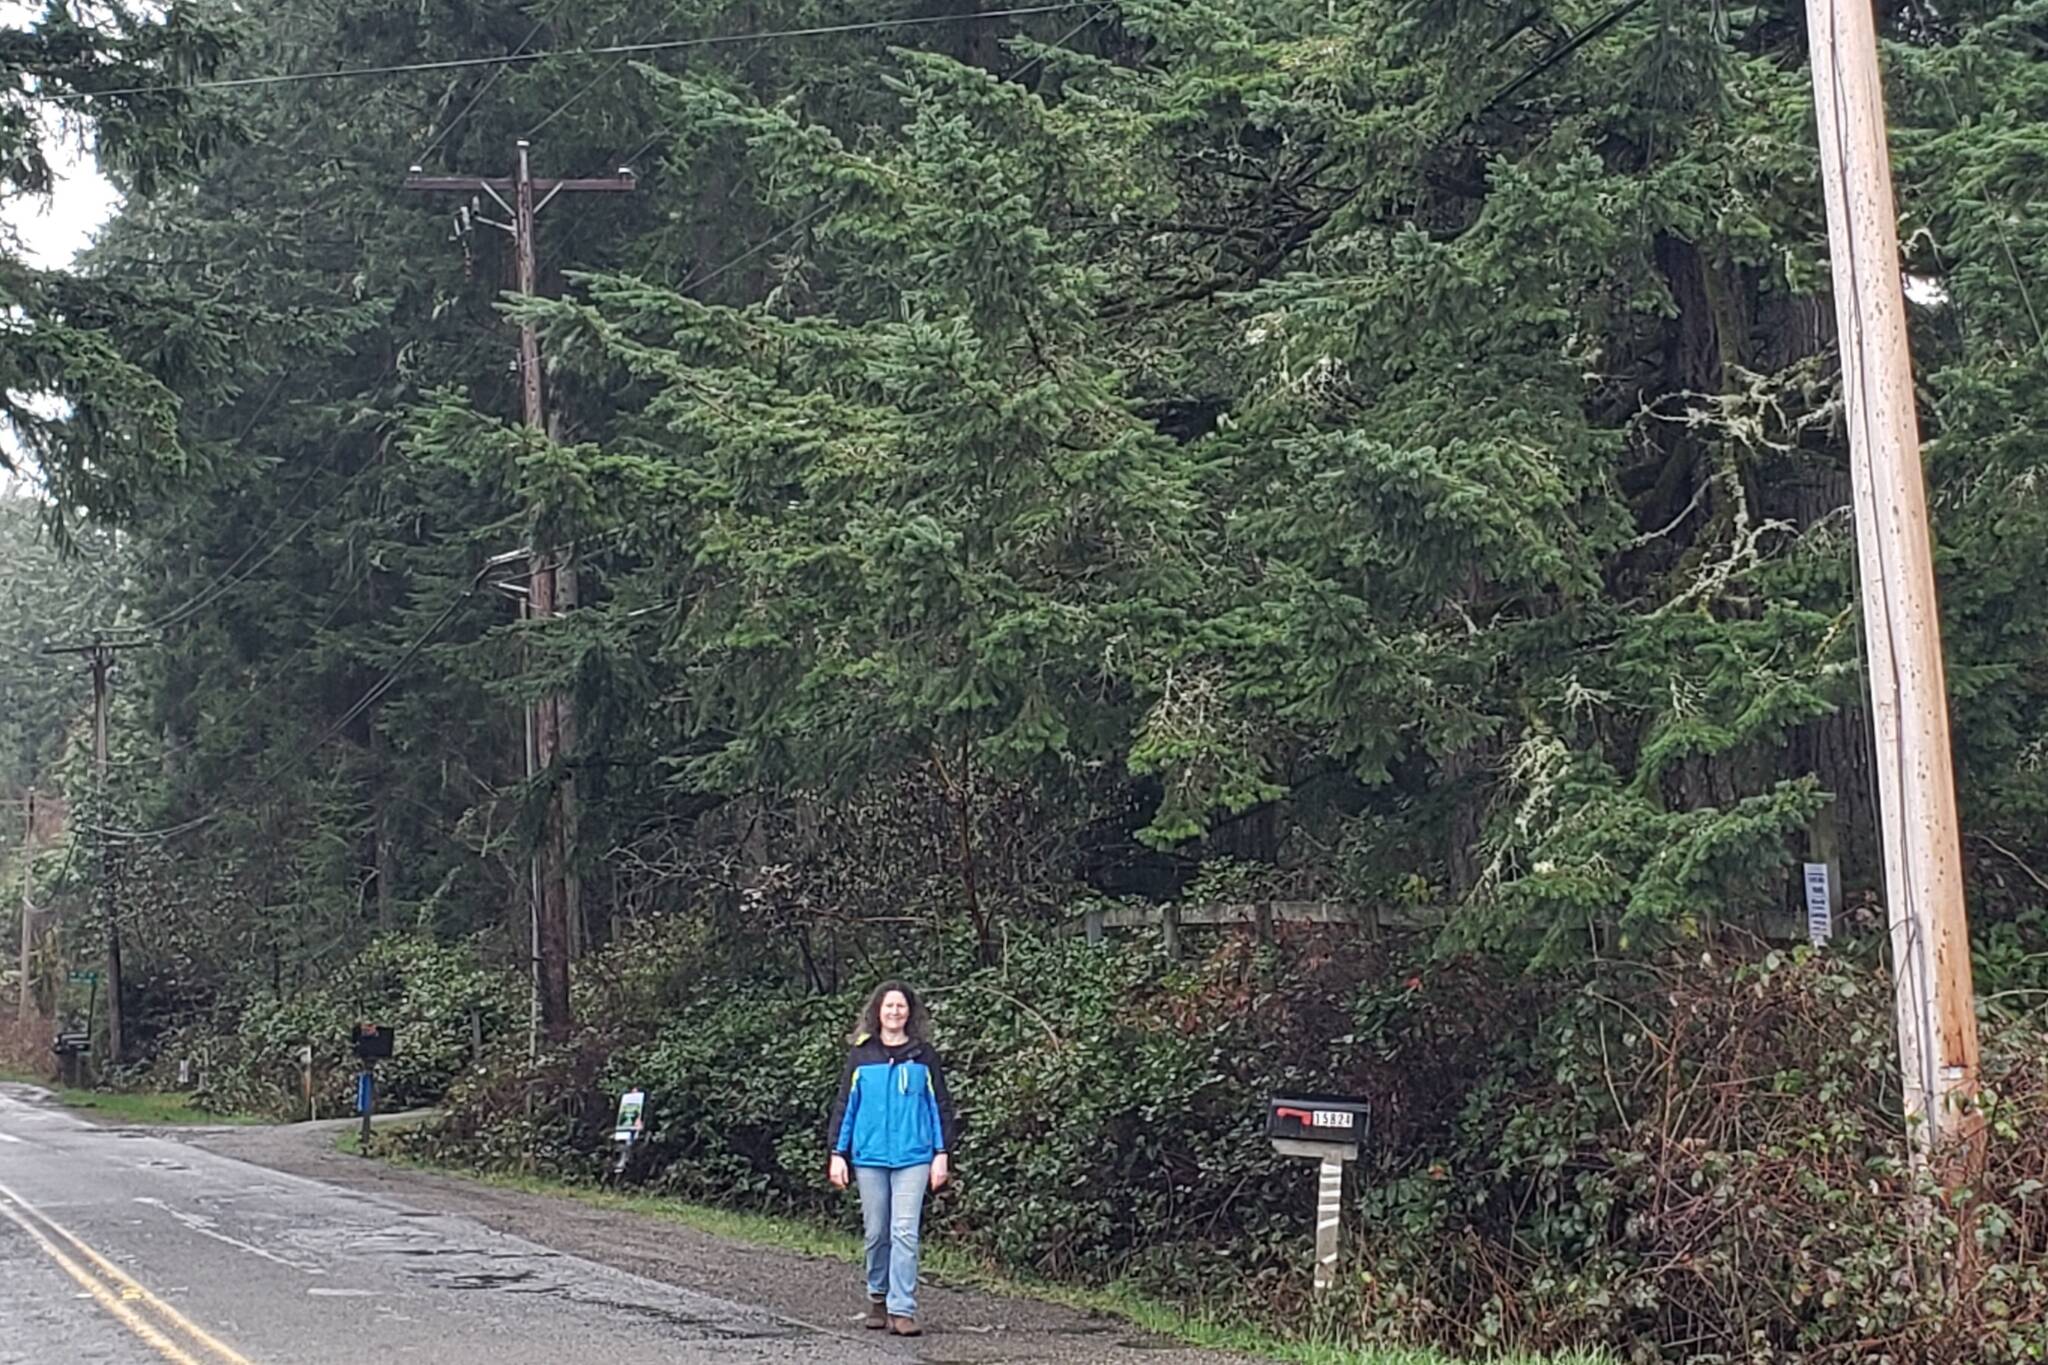 Islander Jenny Bell stands in front of her property on a drizzly day, next to Puget Sound Energy power poles and trees which she fears are at risk were she to sign a PSE easement. Photo by Leslie Brown.